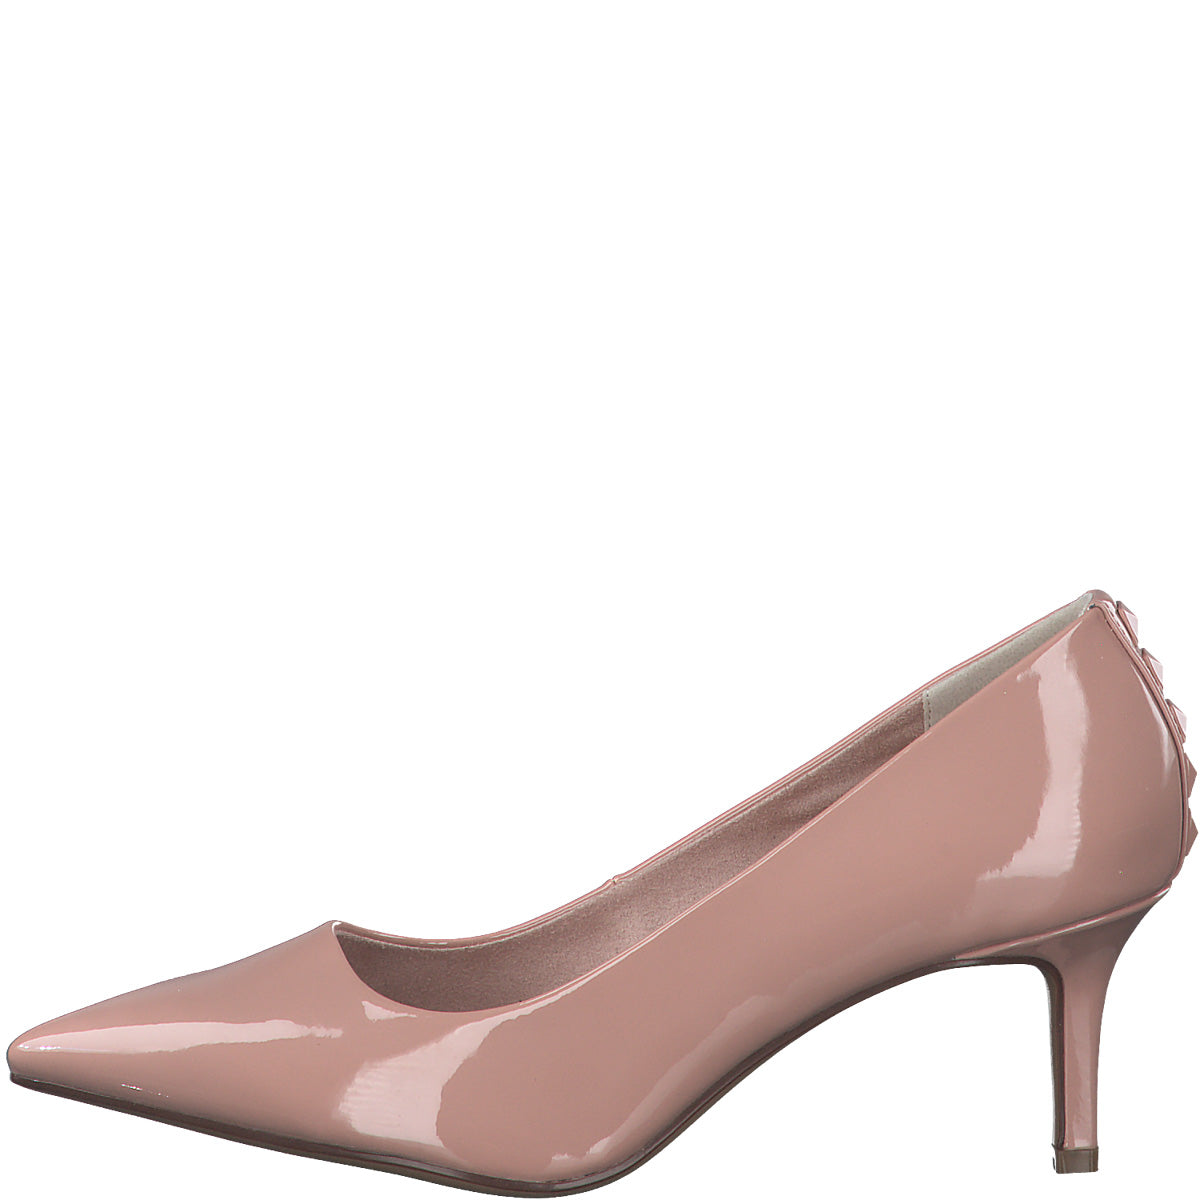 Trendsetter Pink Patent Jeweled Pumps